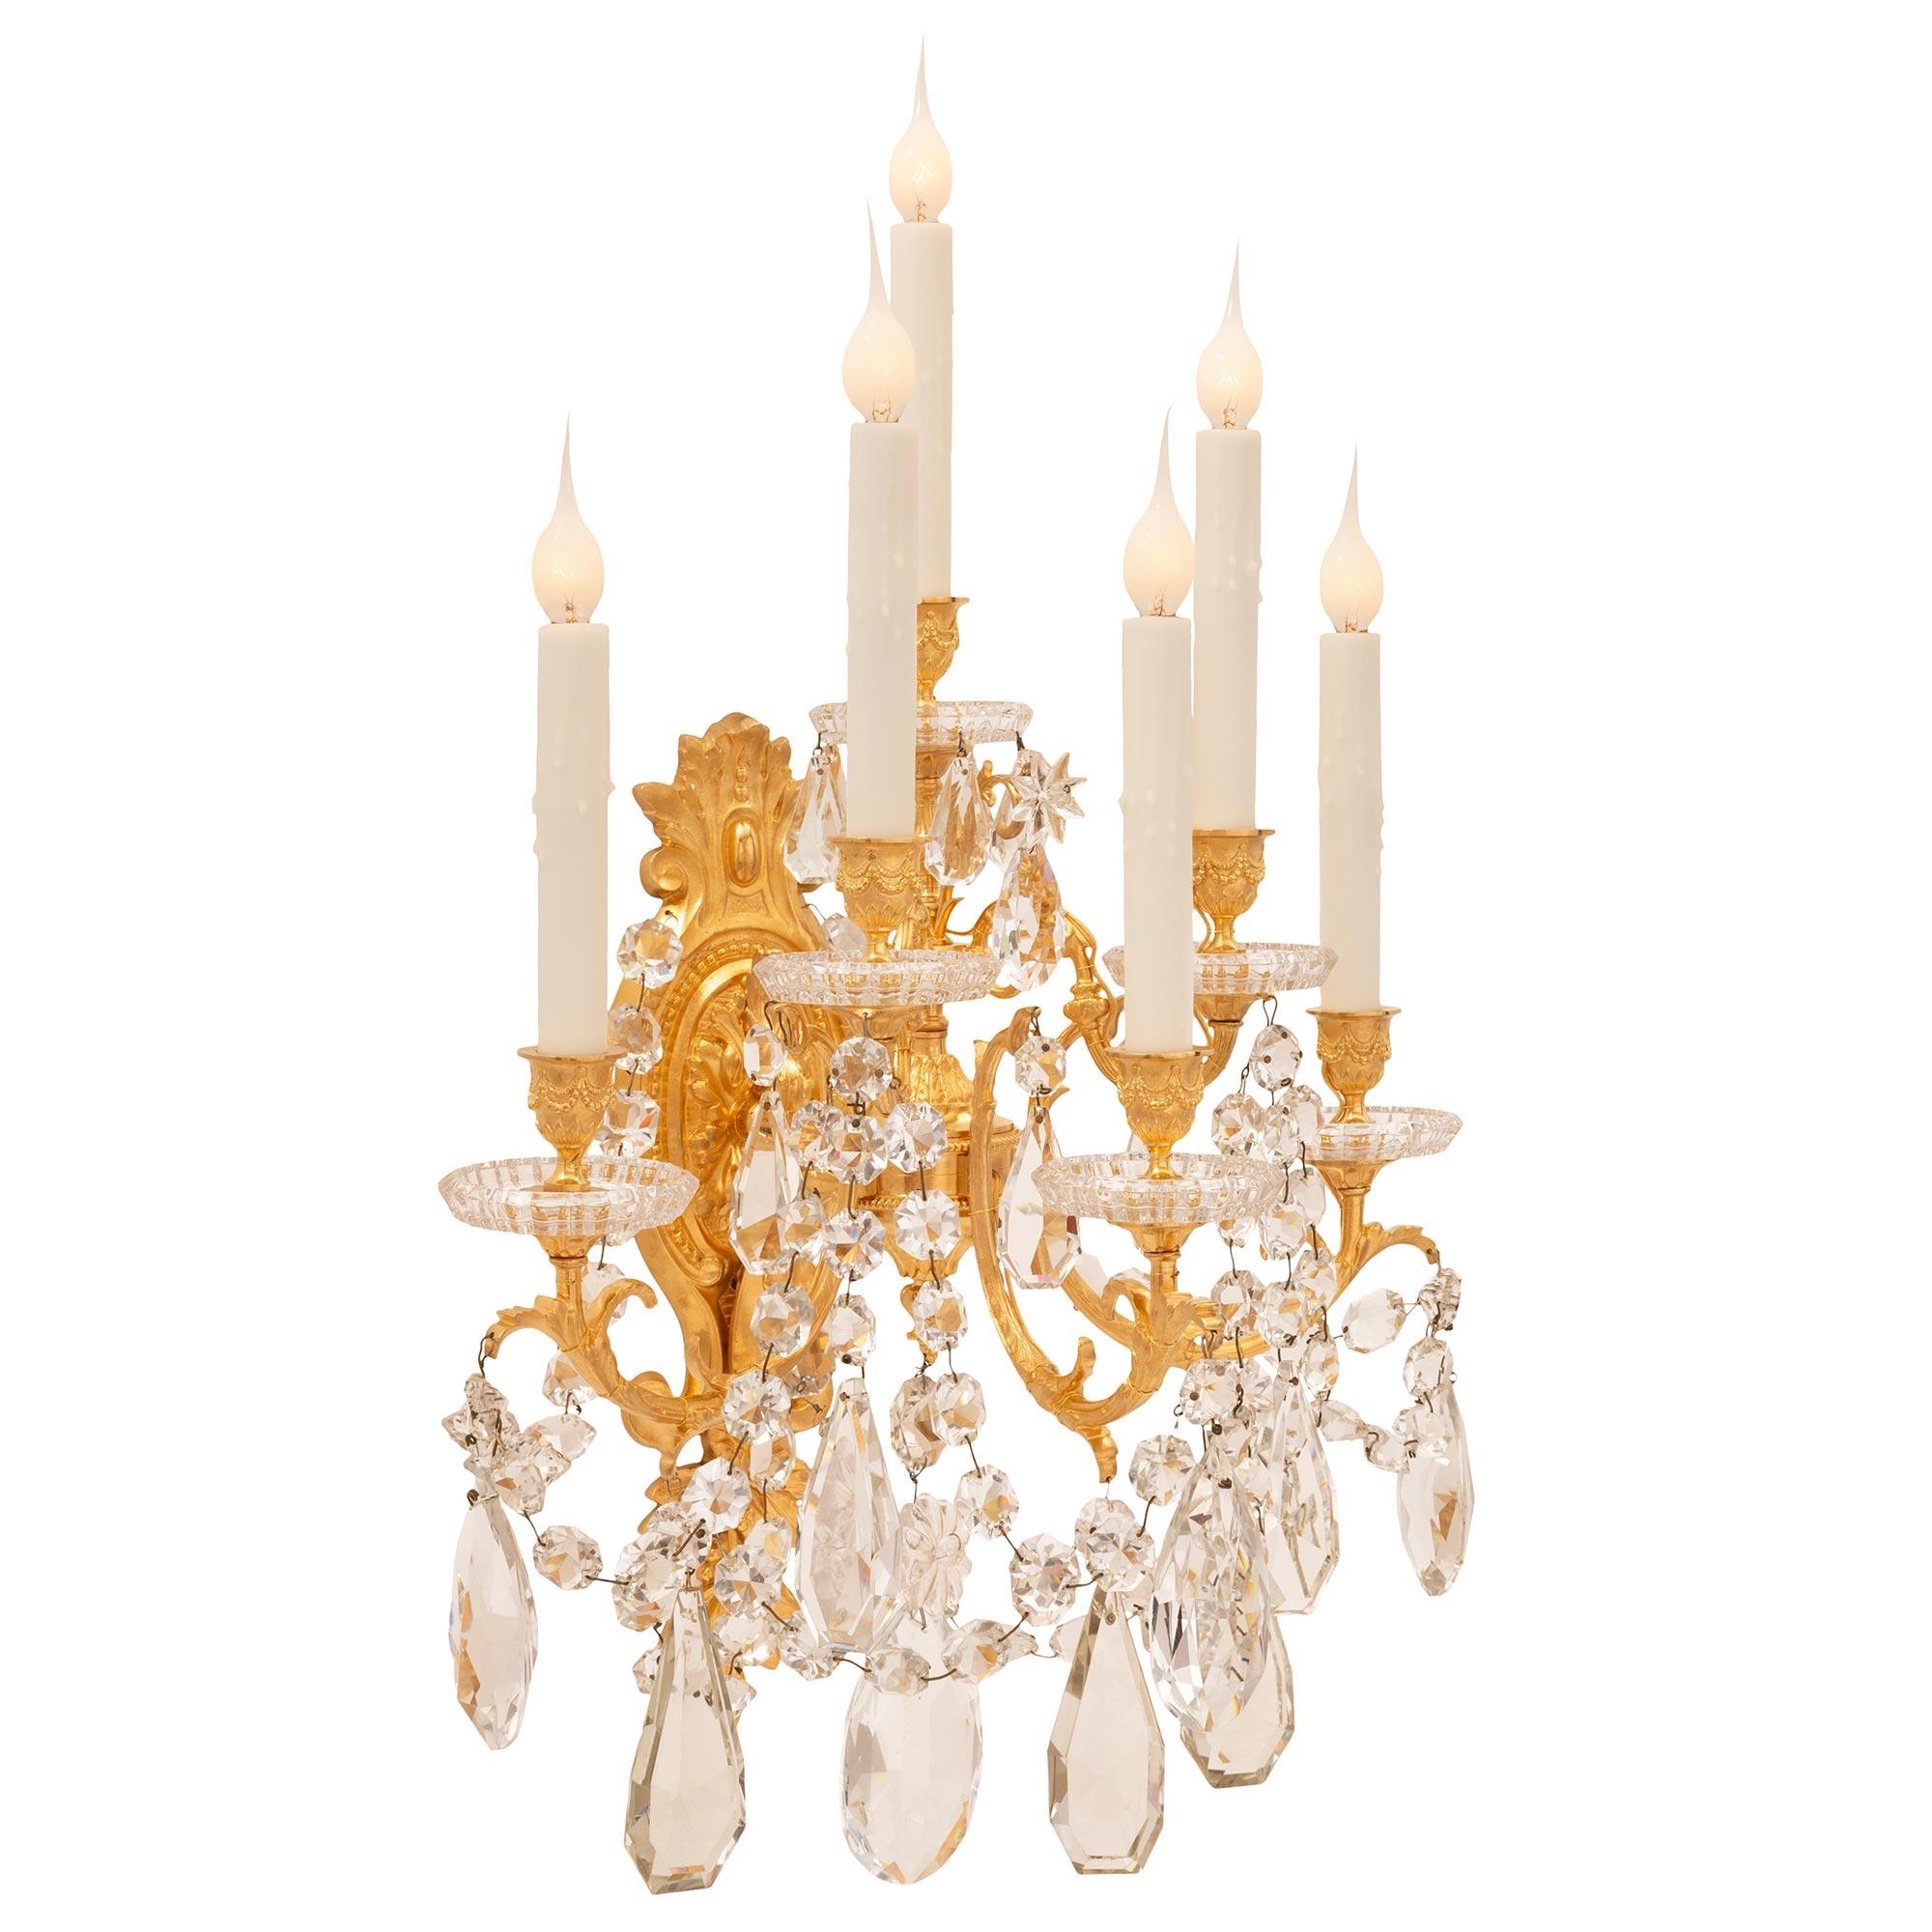 An exceptional pair of French 19th century Louis XVI st. ormolu and Baccarat crystal sconces. Each six arm sconce is centered by a superb ormolu backplate with elegant foliate designs from where the arms branch out. The elegantly curved arms spread